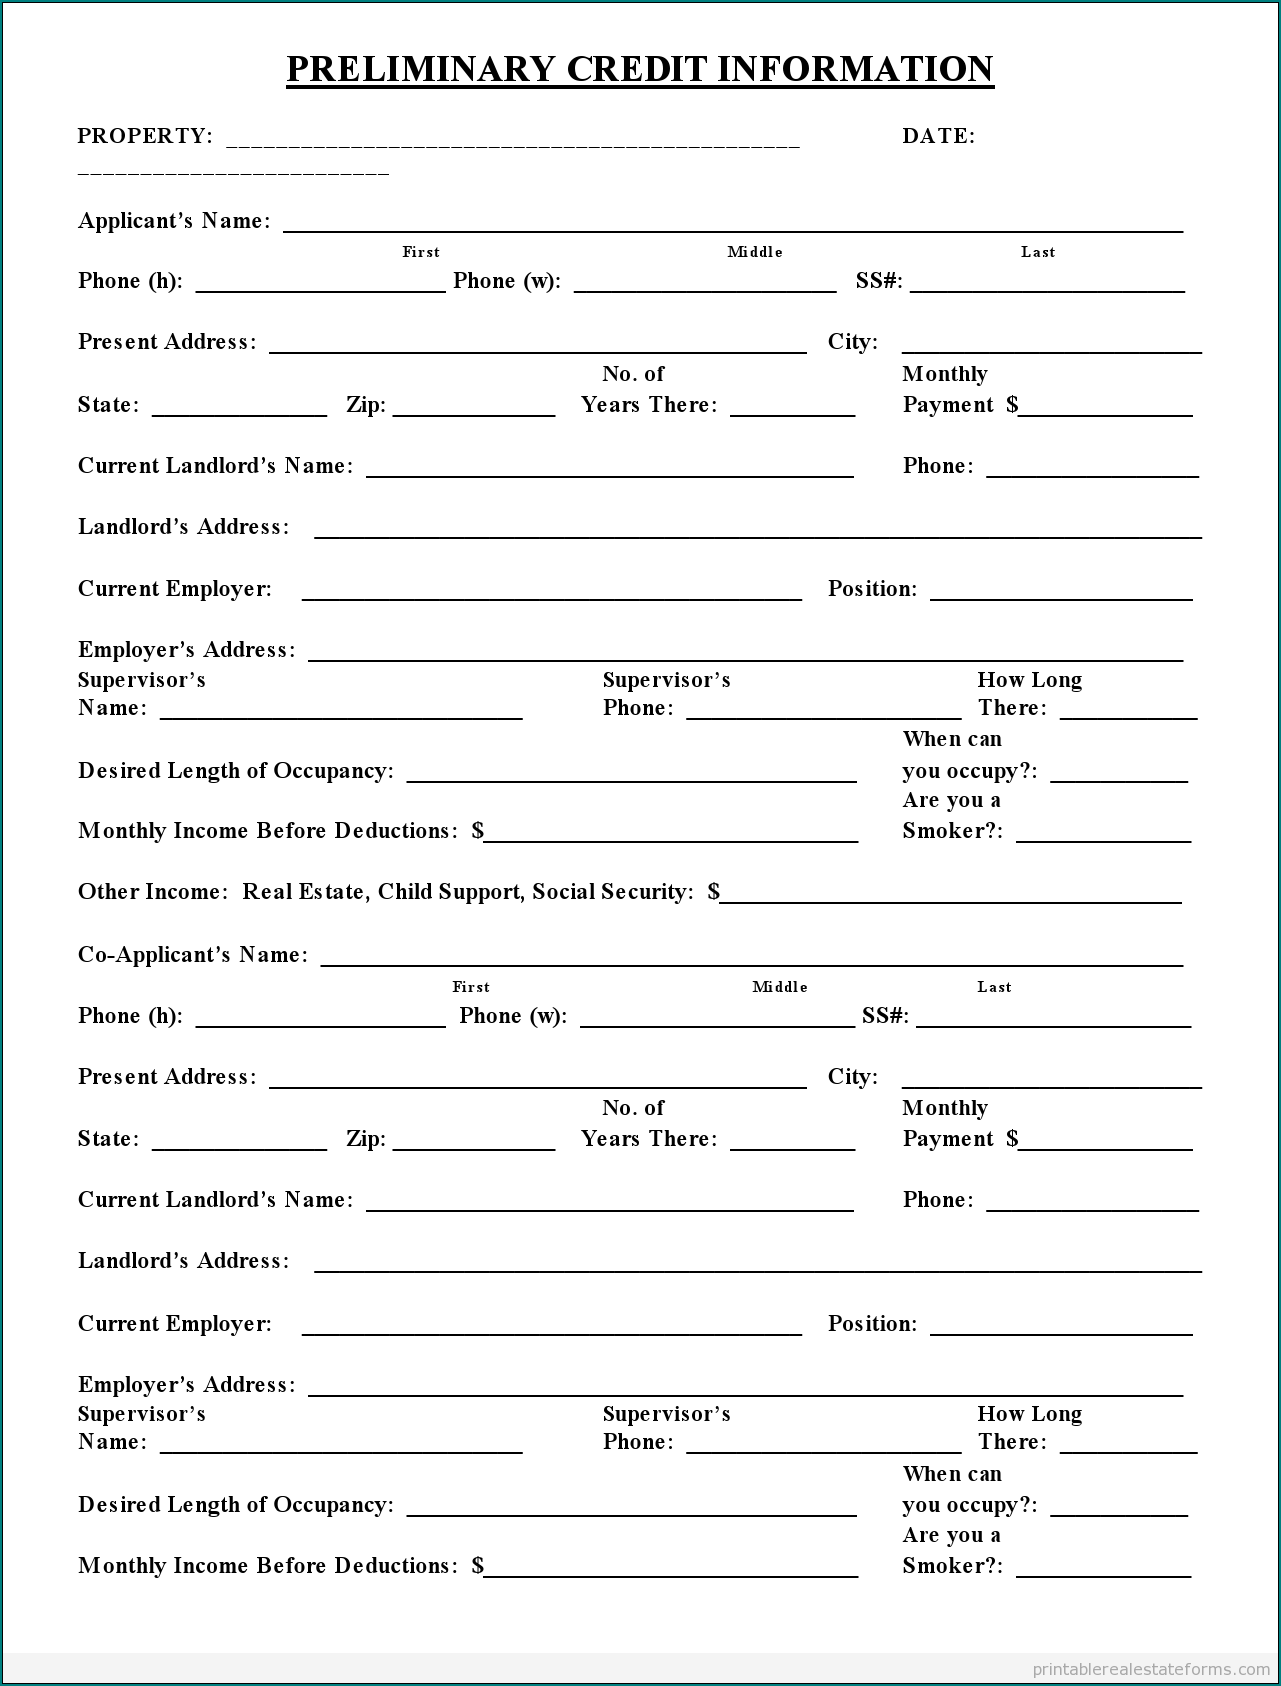 Example of Business Credit Application Form